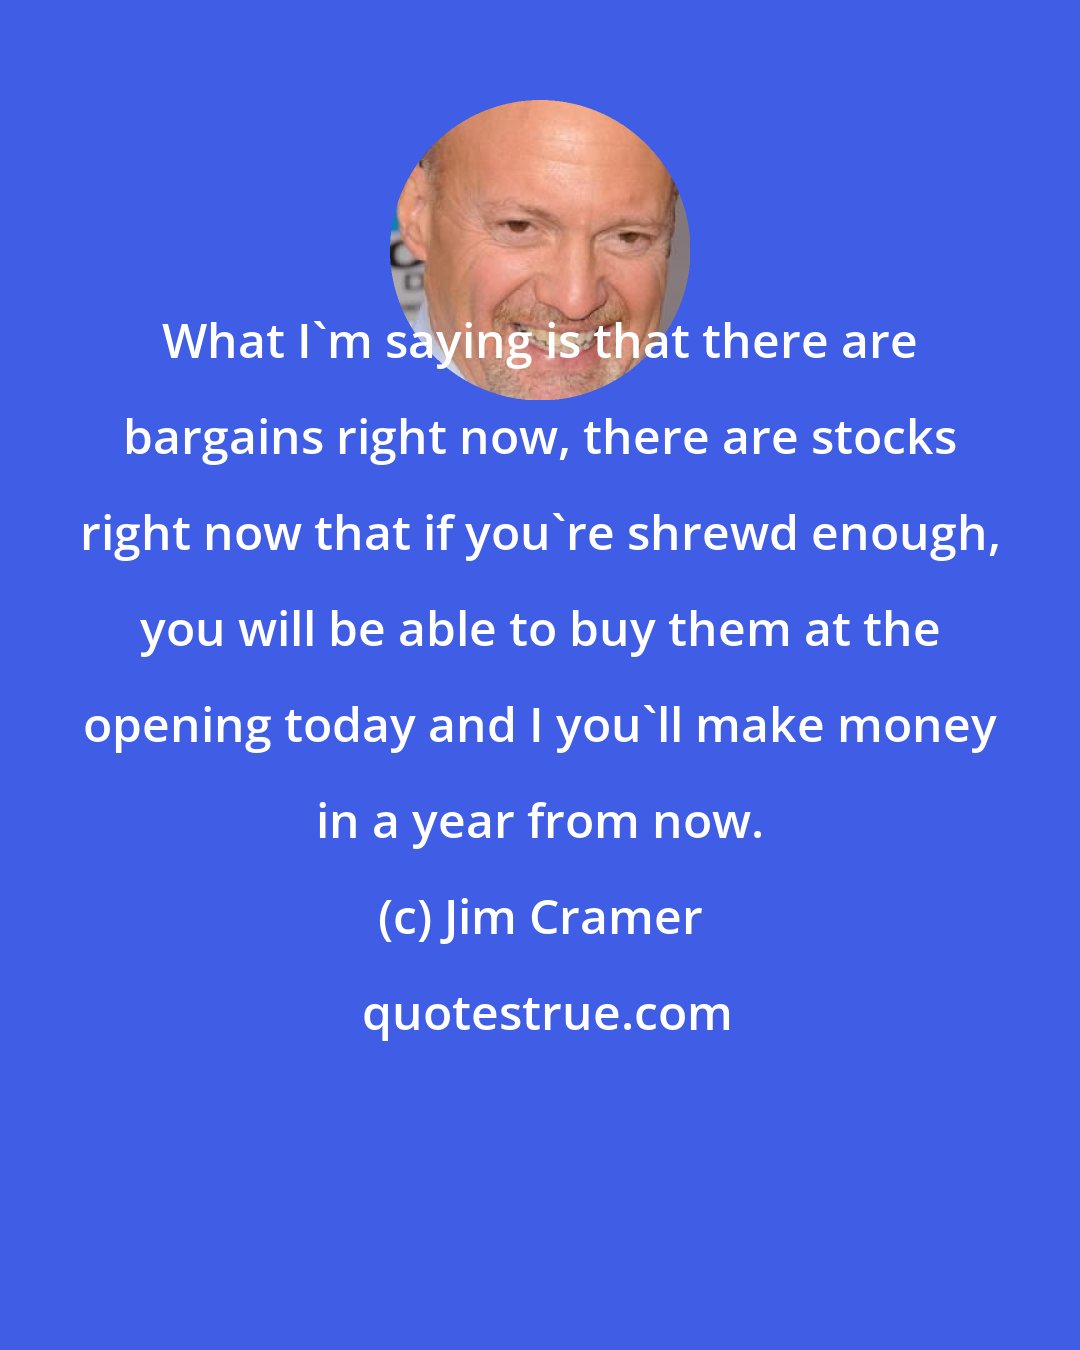 Jim Cramer: What I'm saying is that there are bargains right now, there are stocks right now that if you're shrewd enough, you will be able to buy them at the opening today and I you'll make money in a year from now.